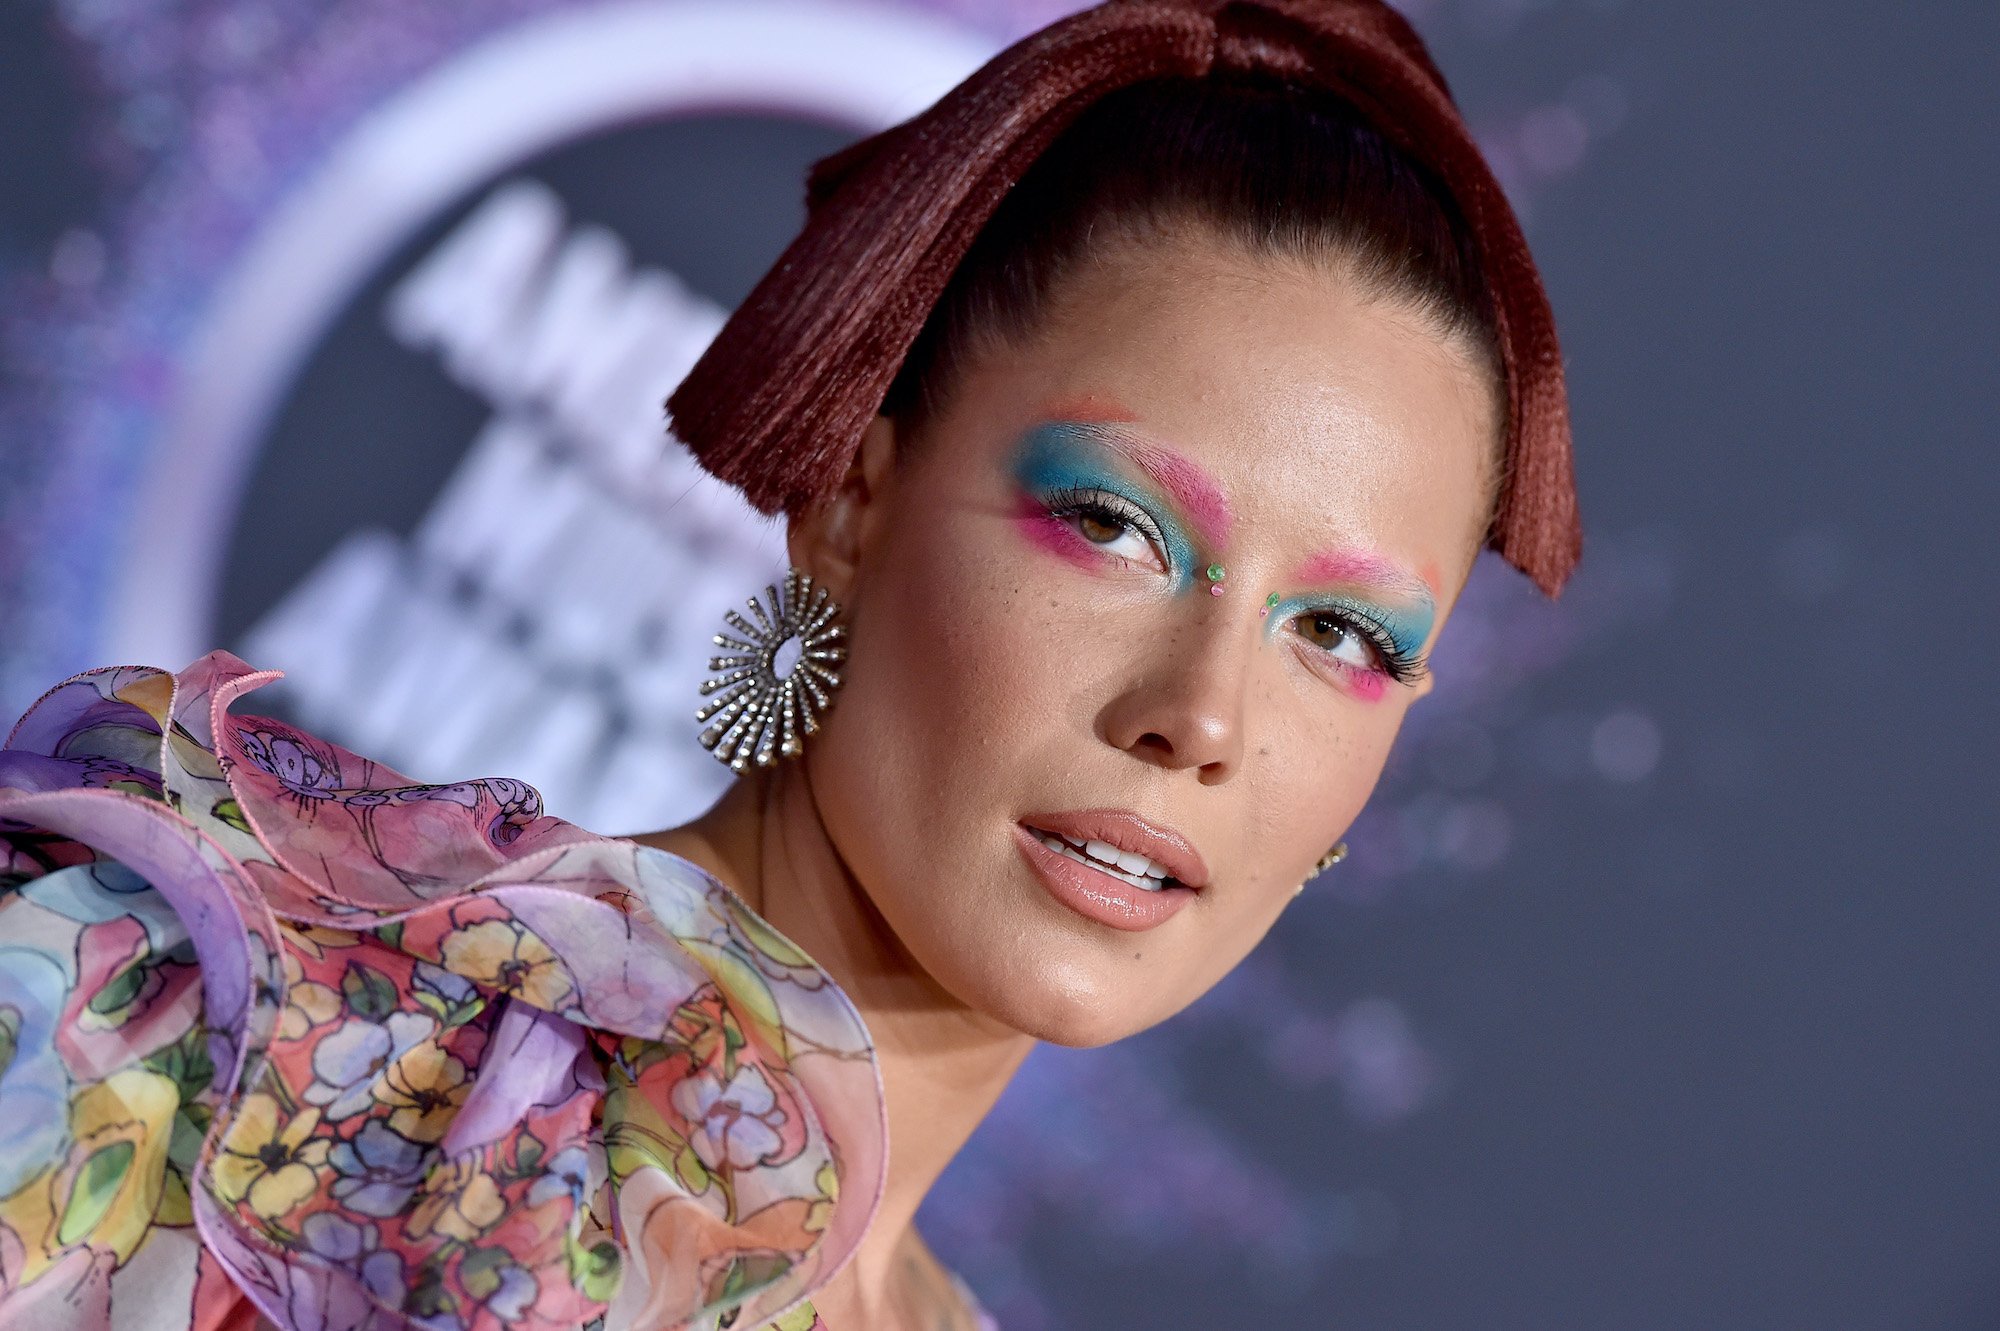 Halsey attends the 2019 American Music Awards 